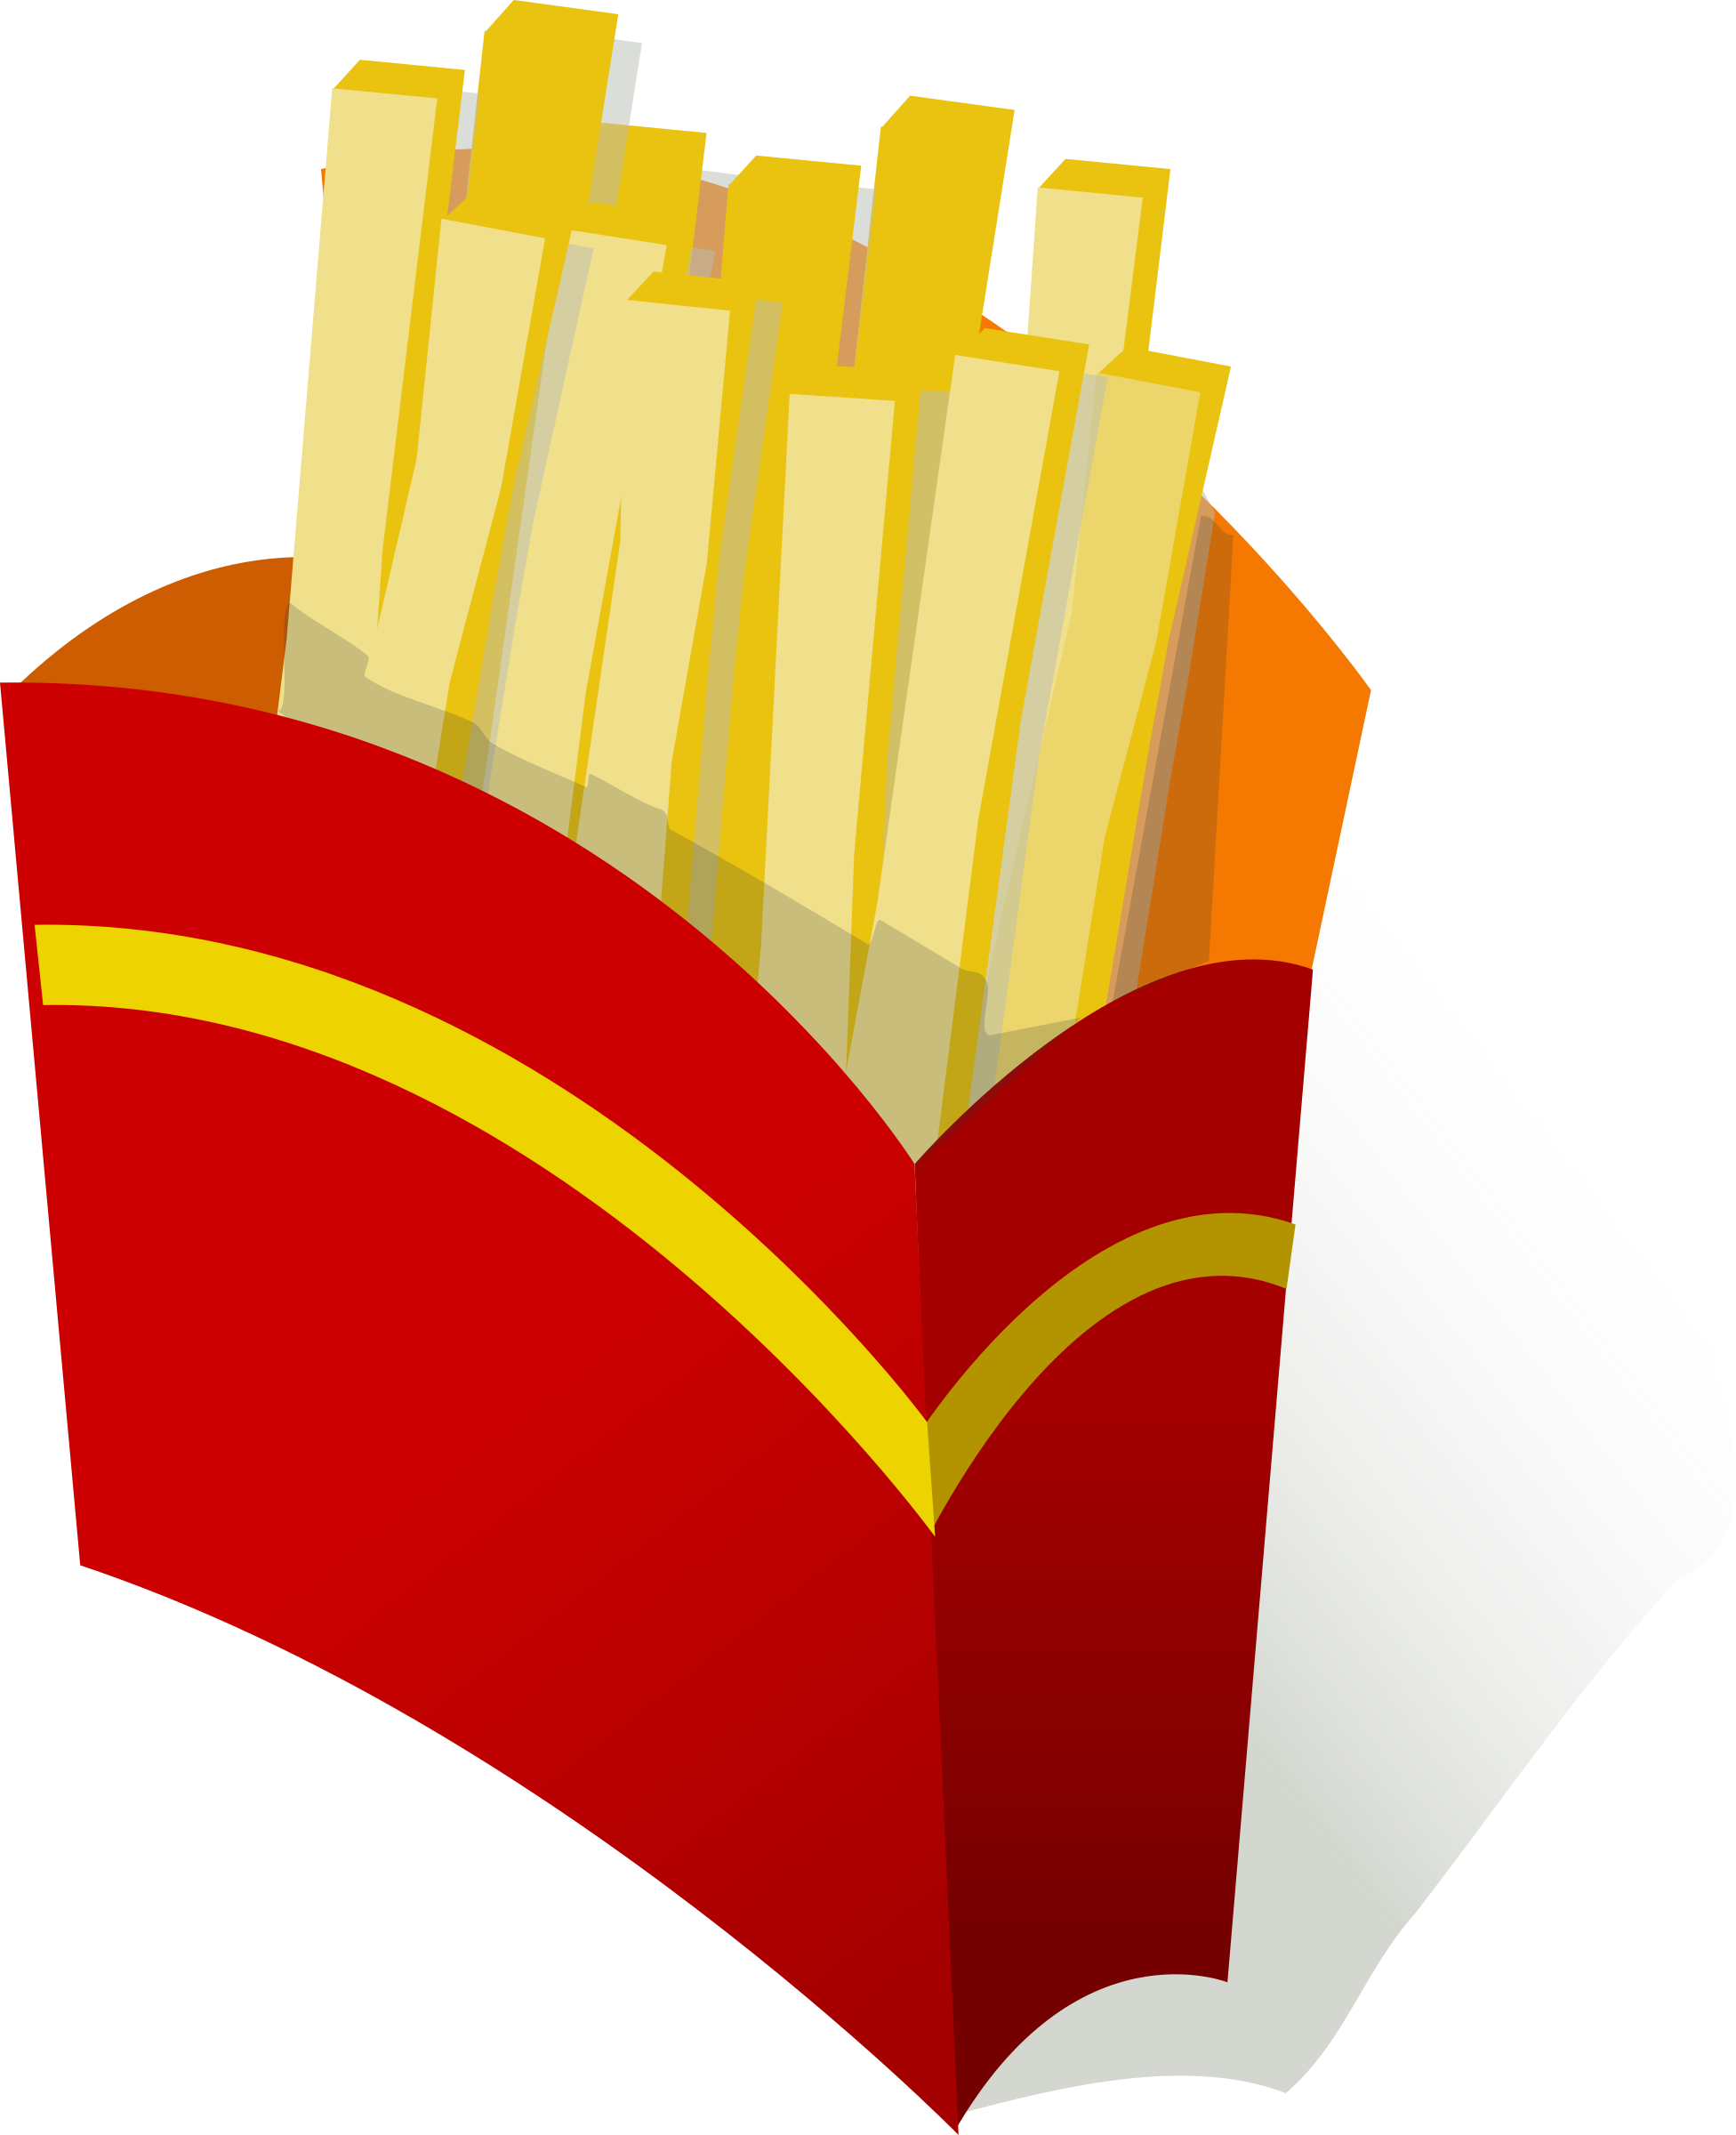 Pommes Frites / French Fries Free Vector - Unhealthy Foods Clipart (1952x2400)